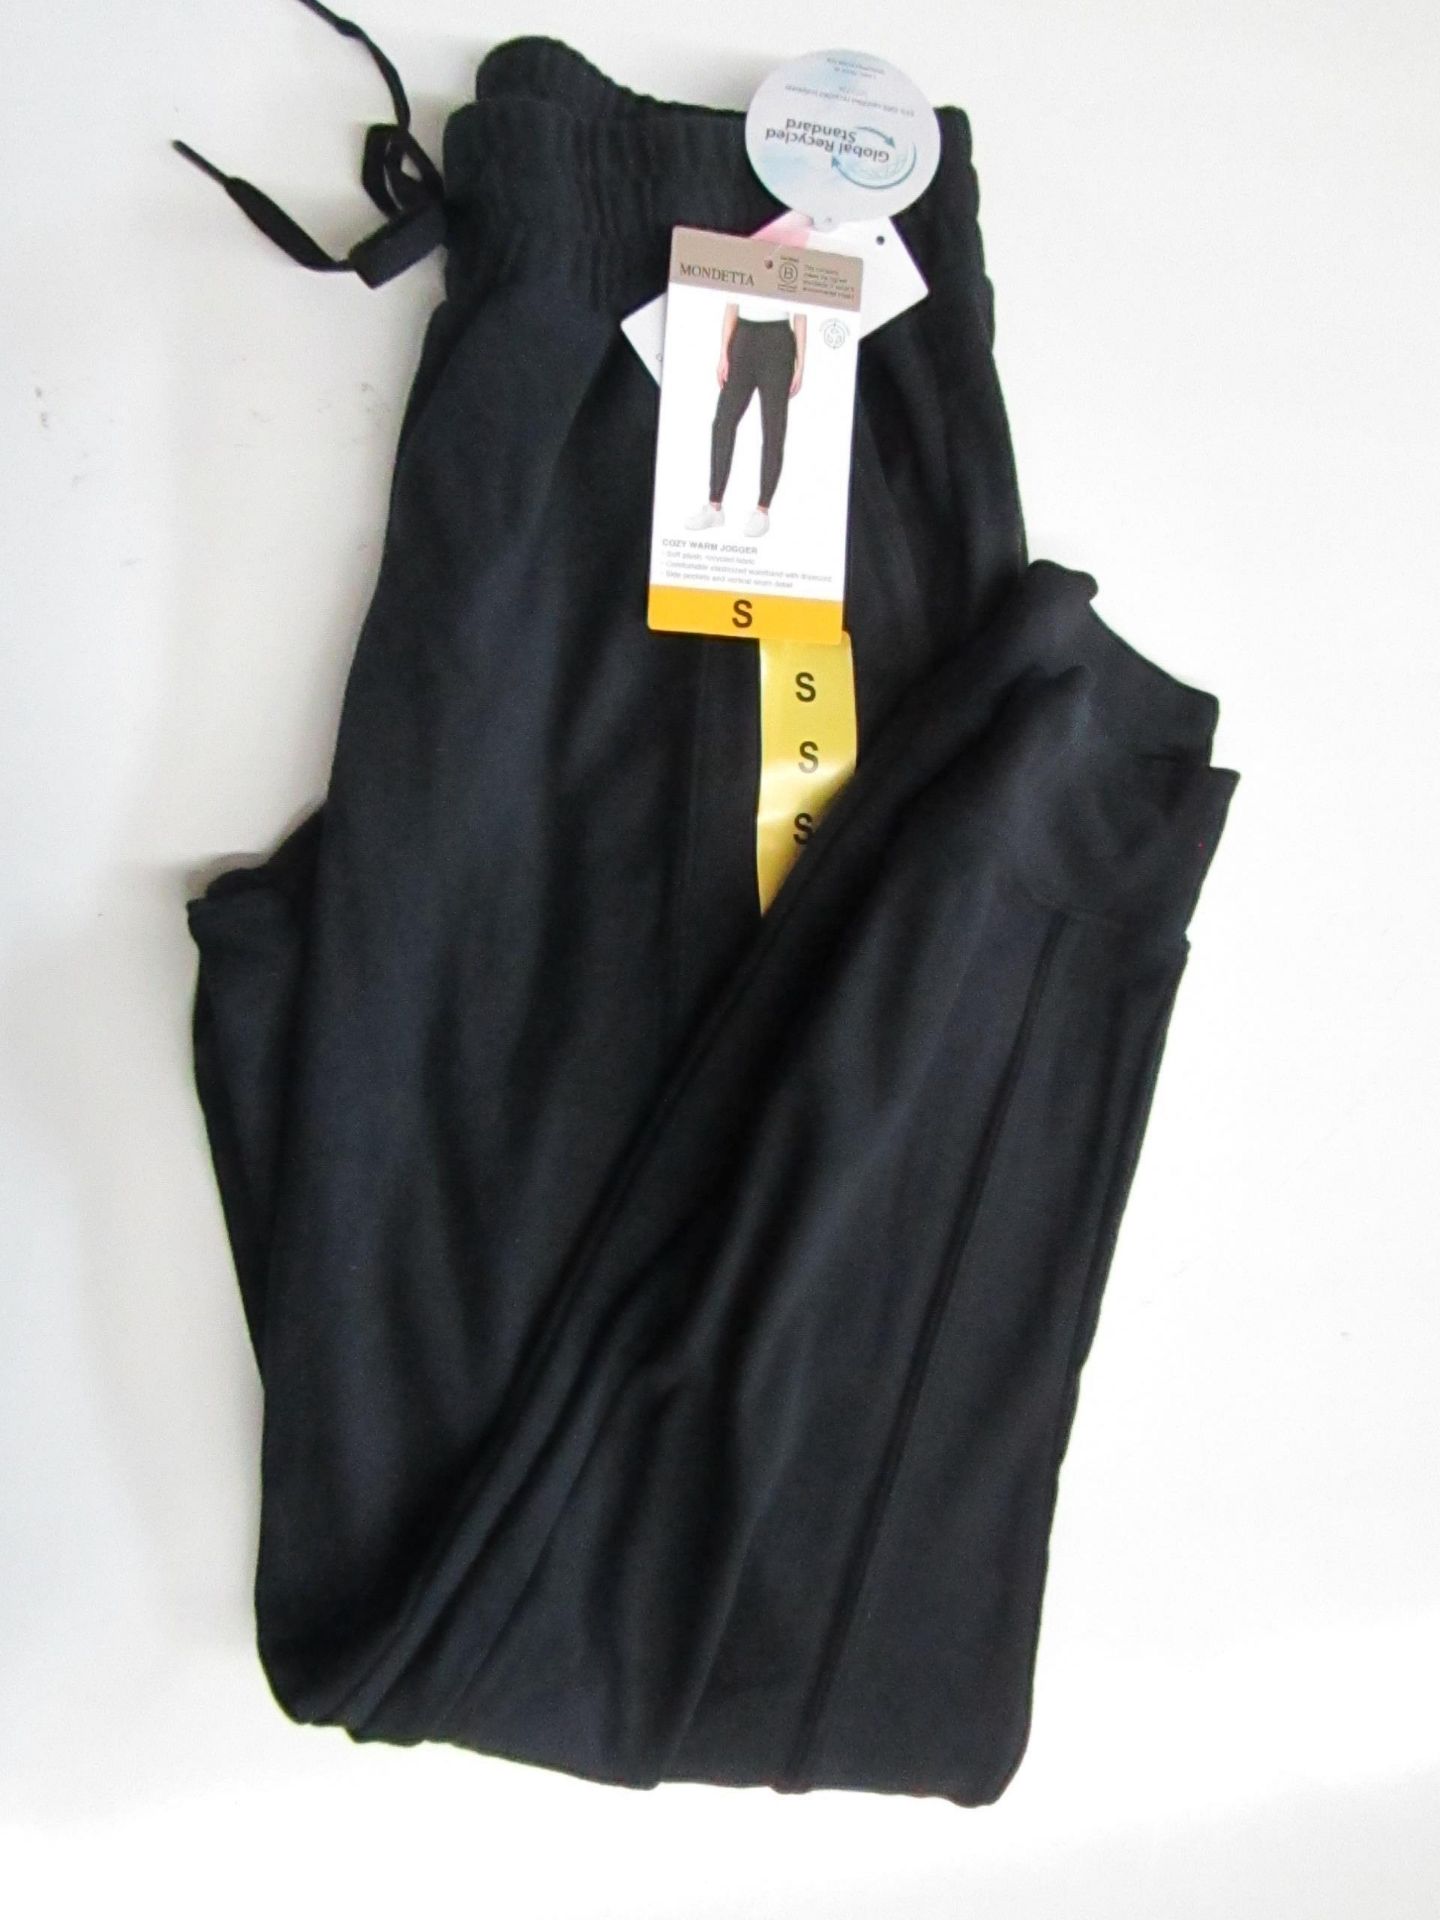 Mondetta Ladies Cozy Joggers Black Size S New With Tags